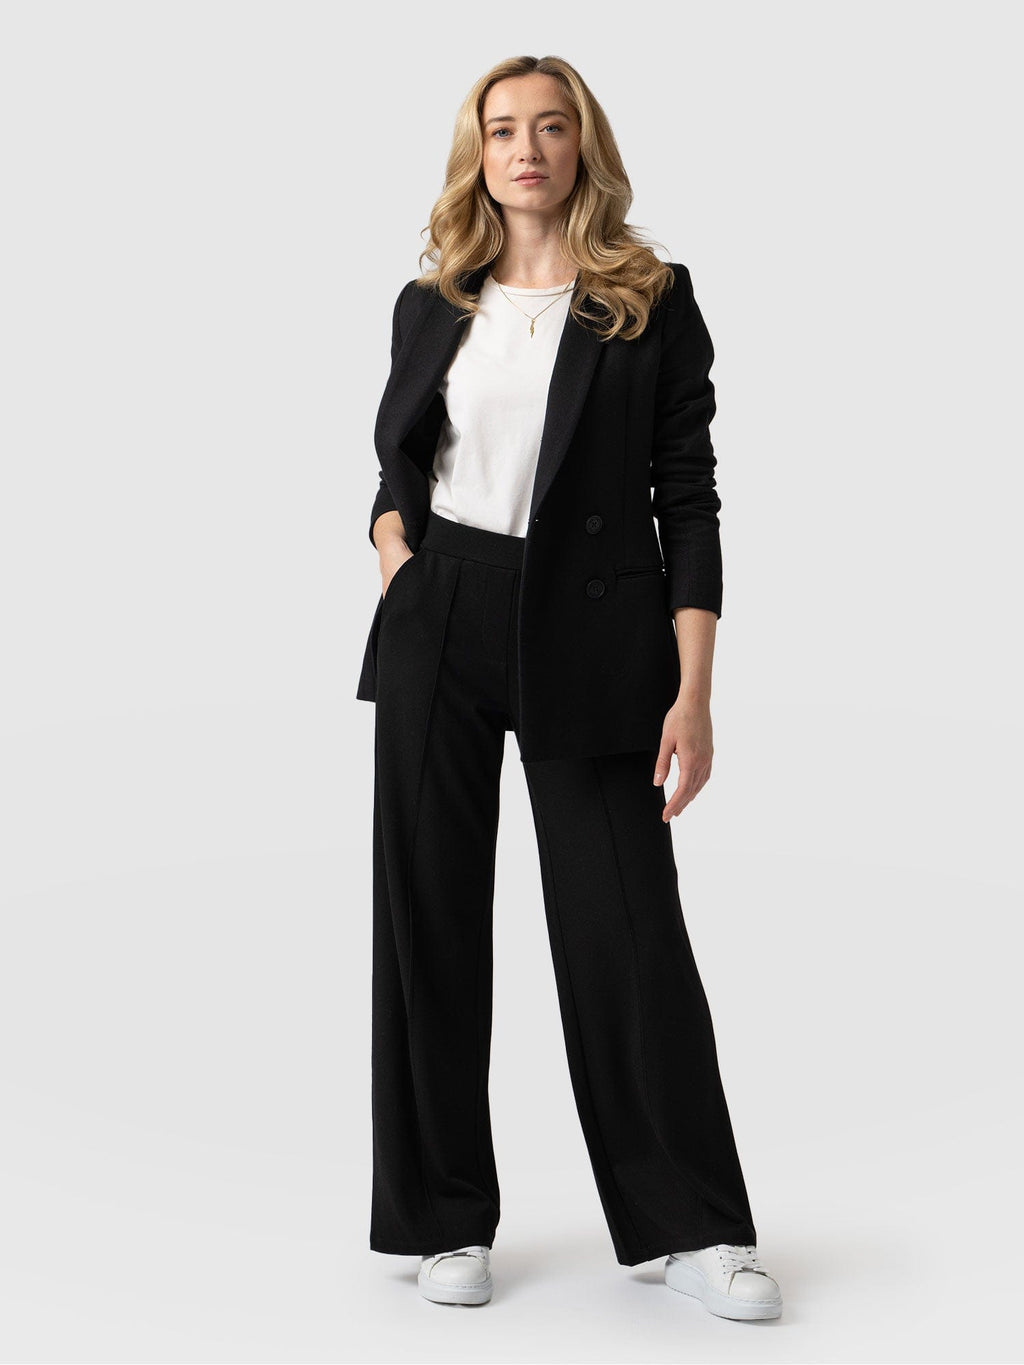 Formal Black Pantsuit for Women, Flared Pants Suit With Fitted Blazer,  Black Formal Blazer Trouser for Women, Formal Womens Wear Office -   Canada